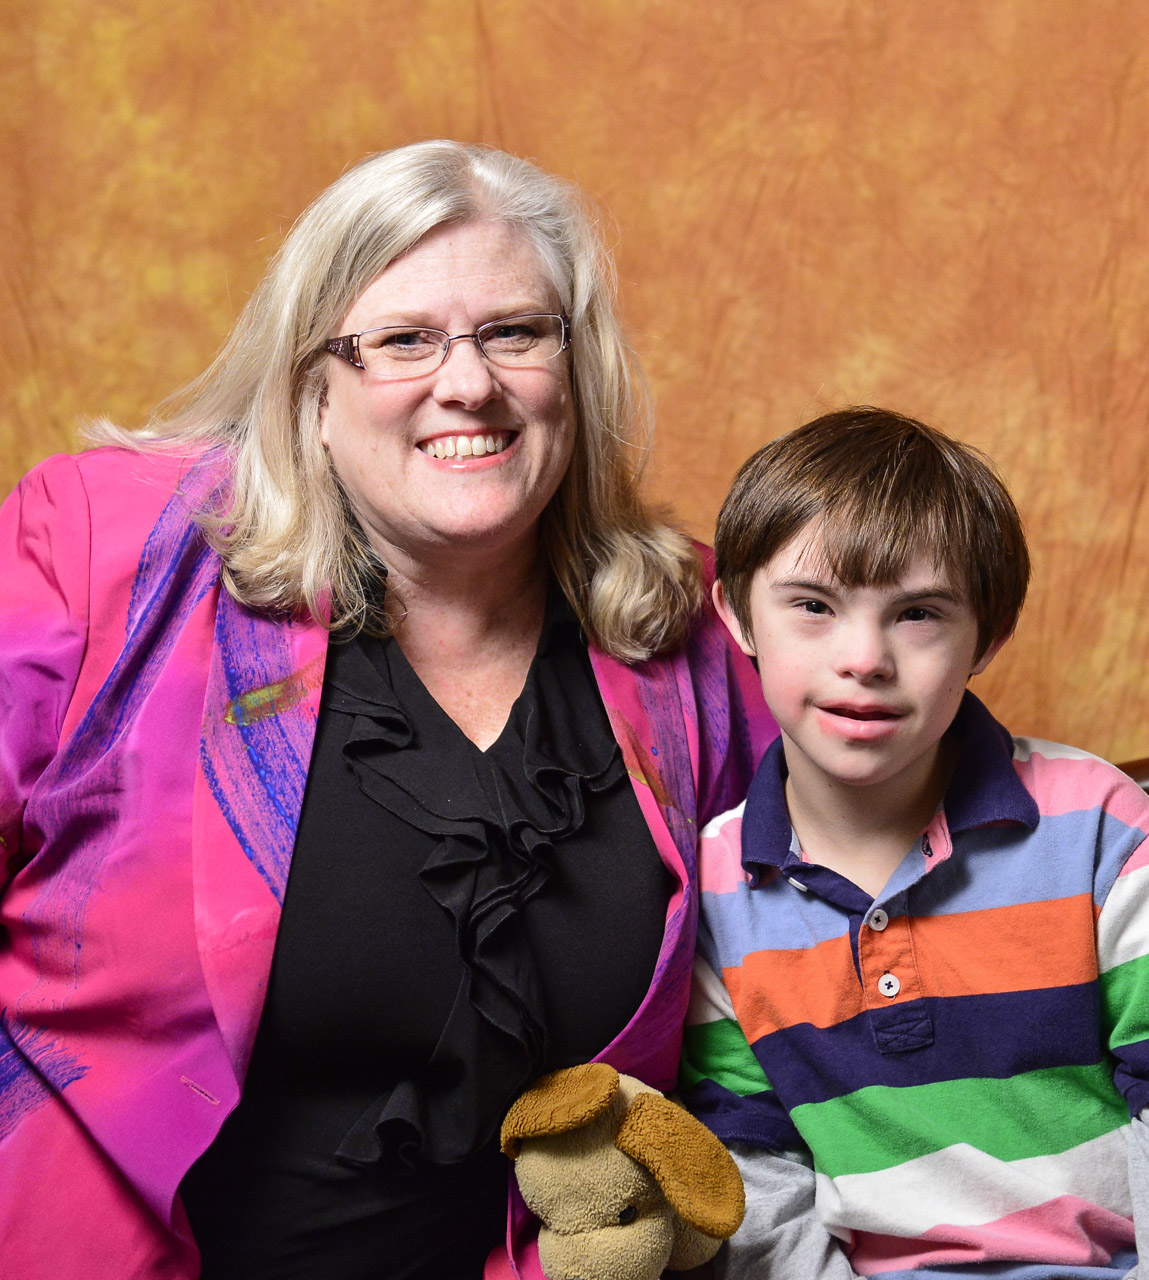 A woman and her son pose in front of an orange background.